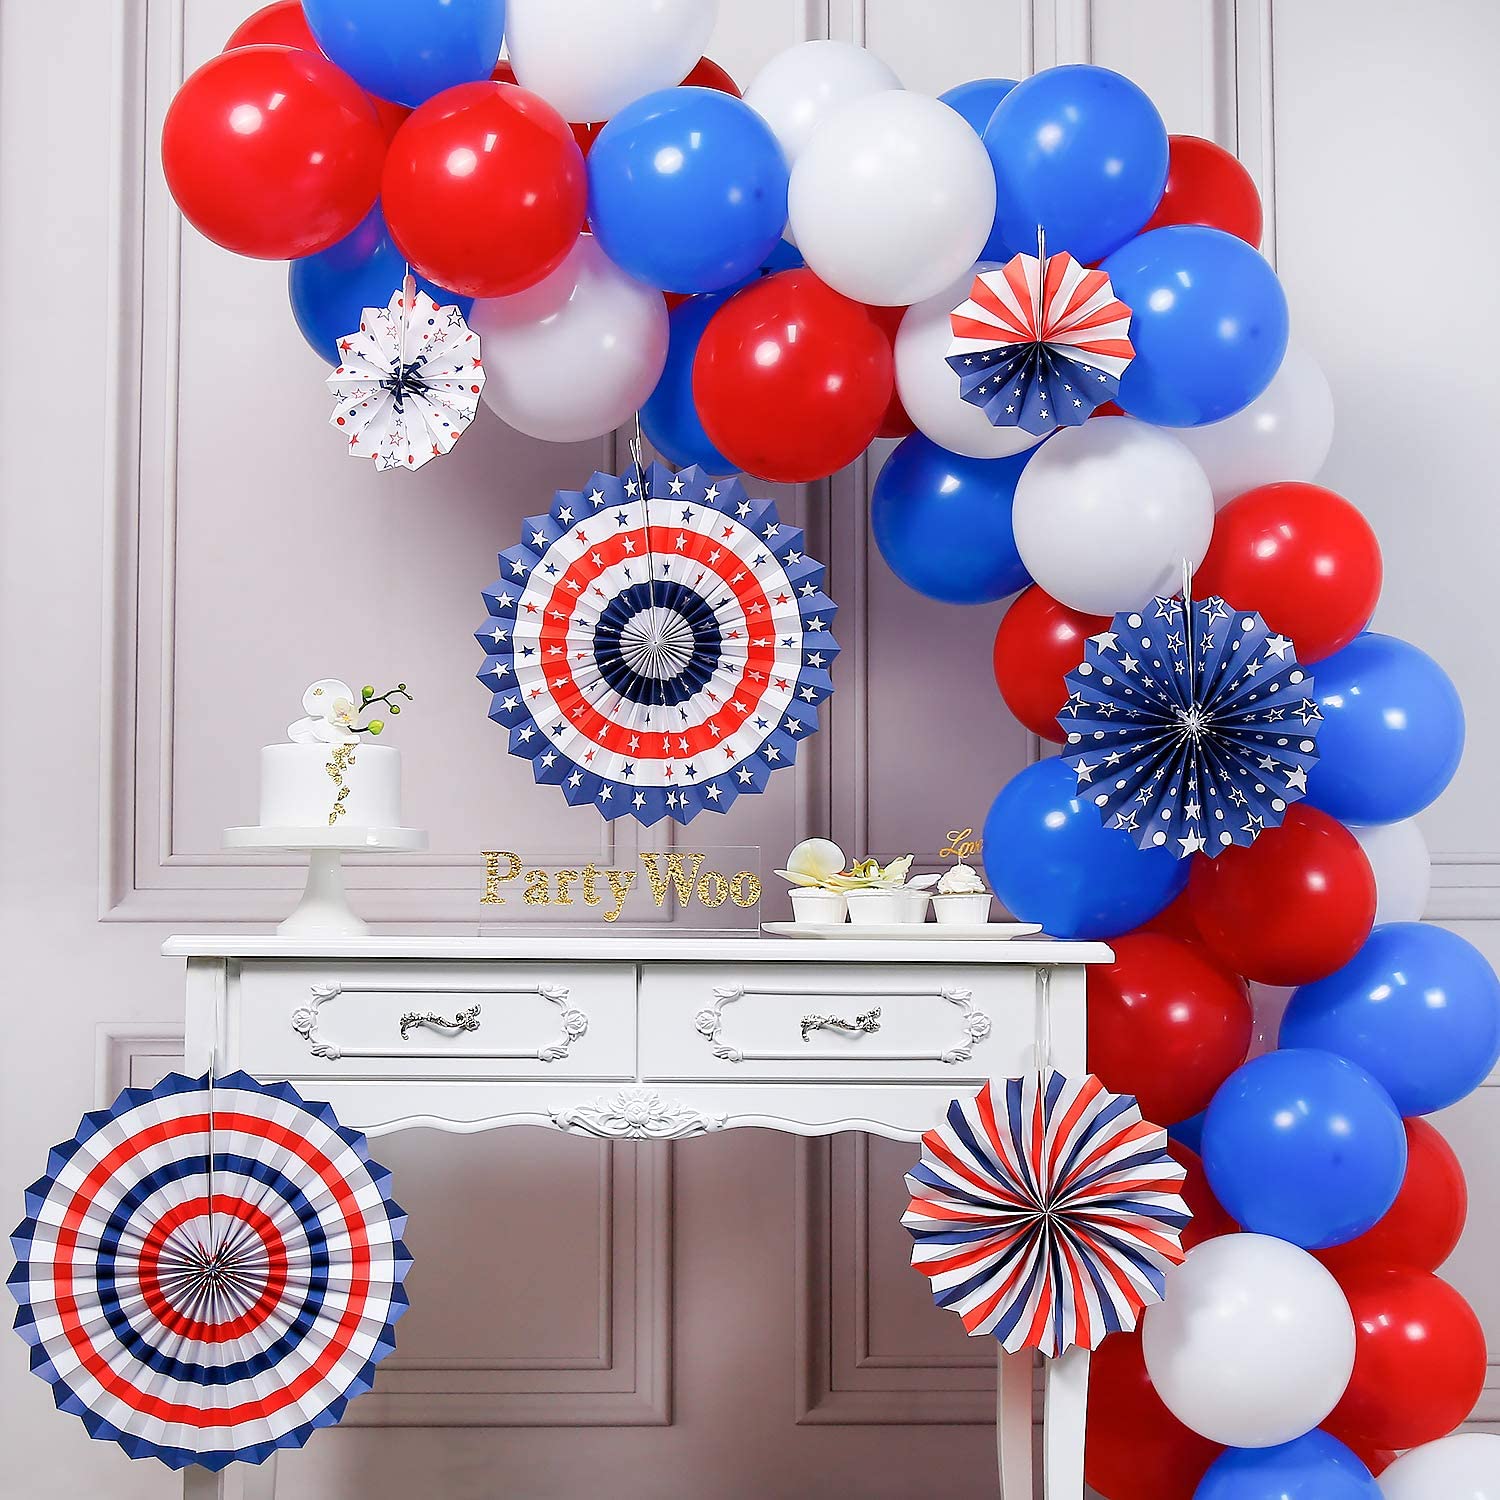 Spider Man USA Party PuTwo Red Blue and White Balloons 66 pcs 12 inch Red Balloons White Balloons Royal Blue Balloons for Captain America the Avenger Party including Paper Pom Poms 